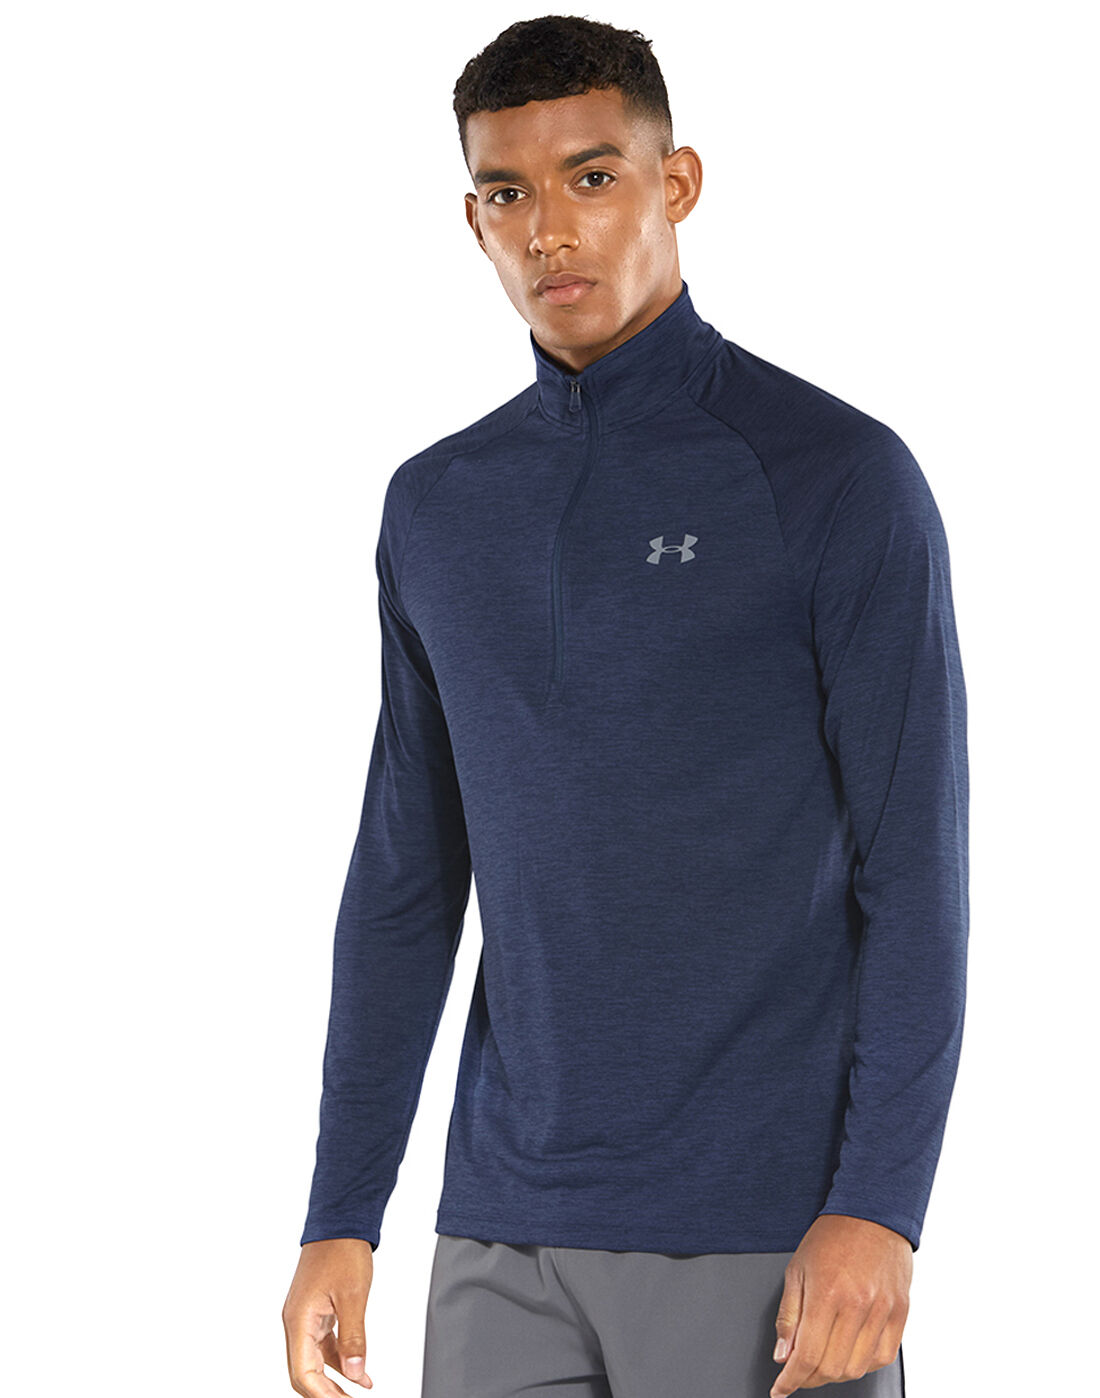 Under Armour Tech 2.0 1/2 Zip Light and Breathable Zip Up Top for Working Out Men Versatile Warm Up Top for Men 